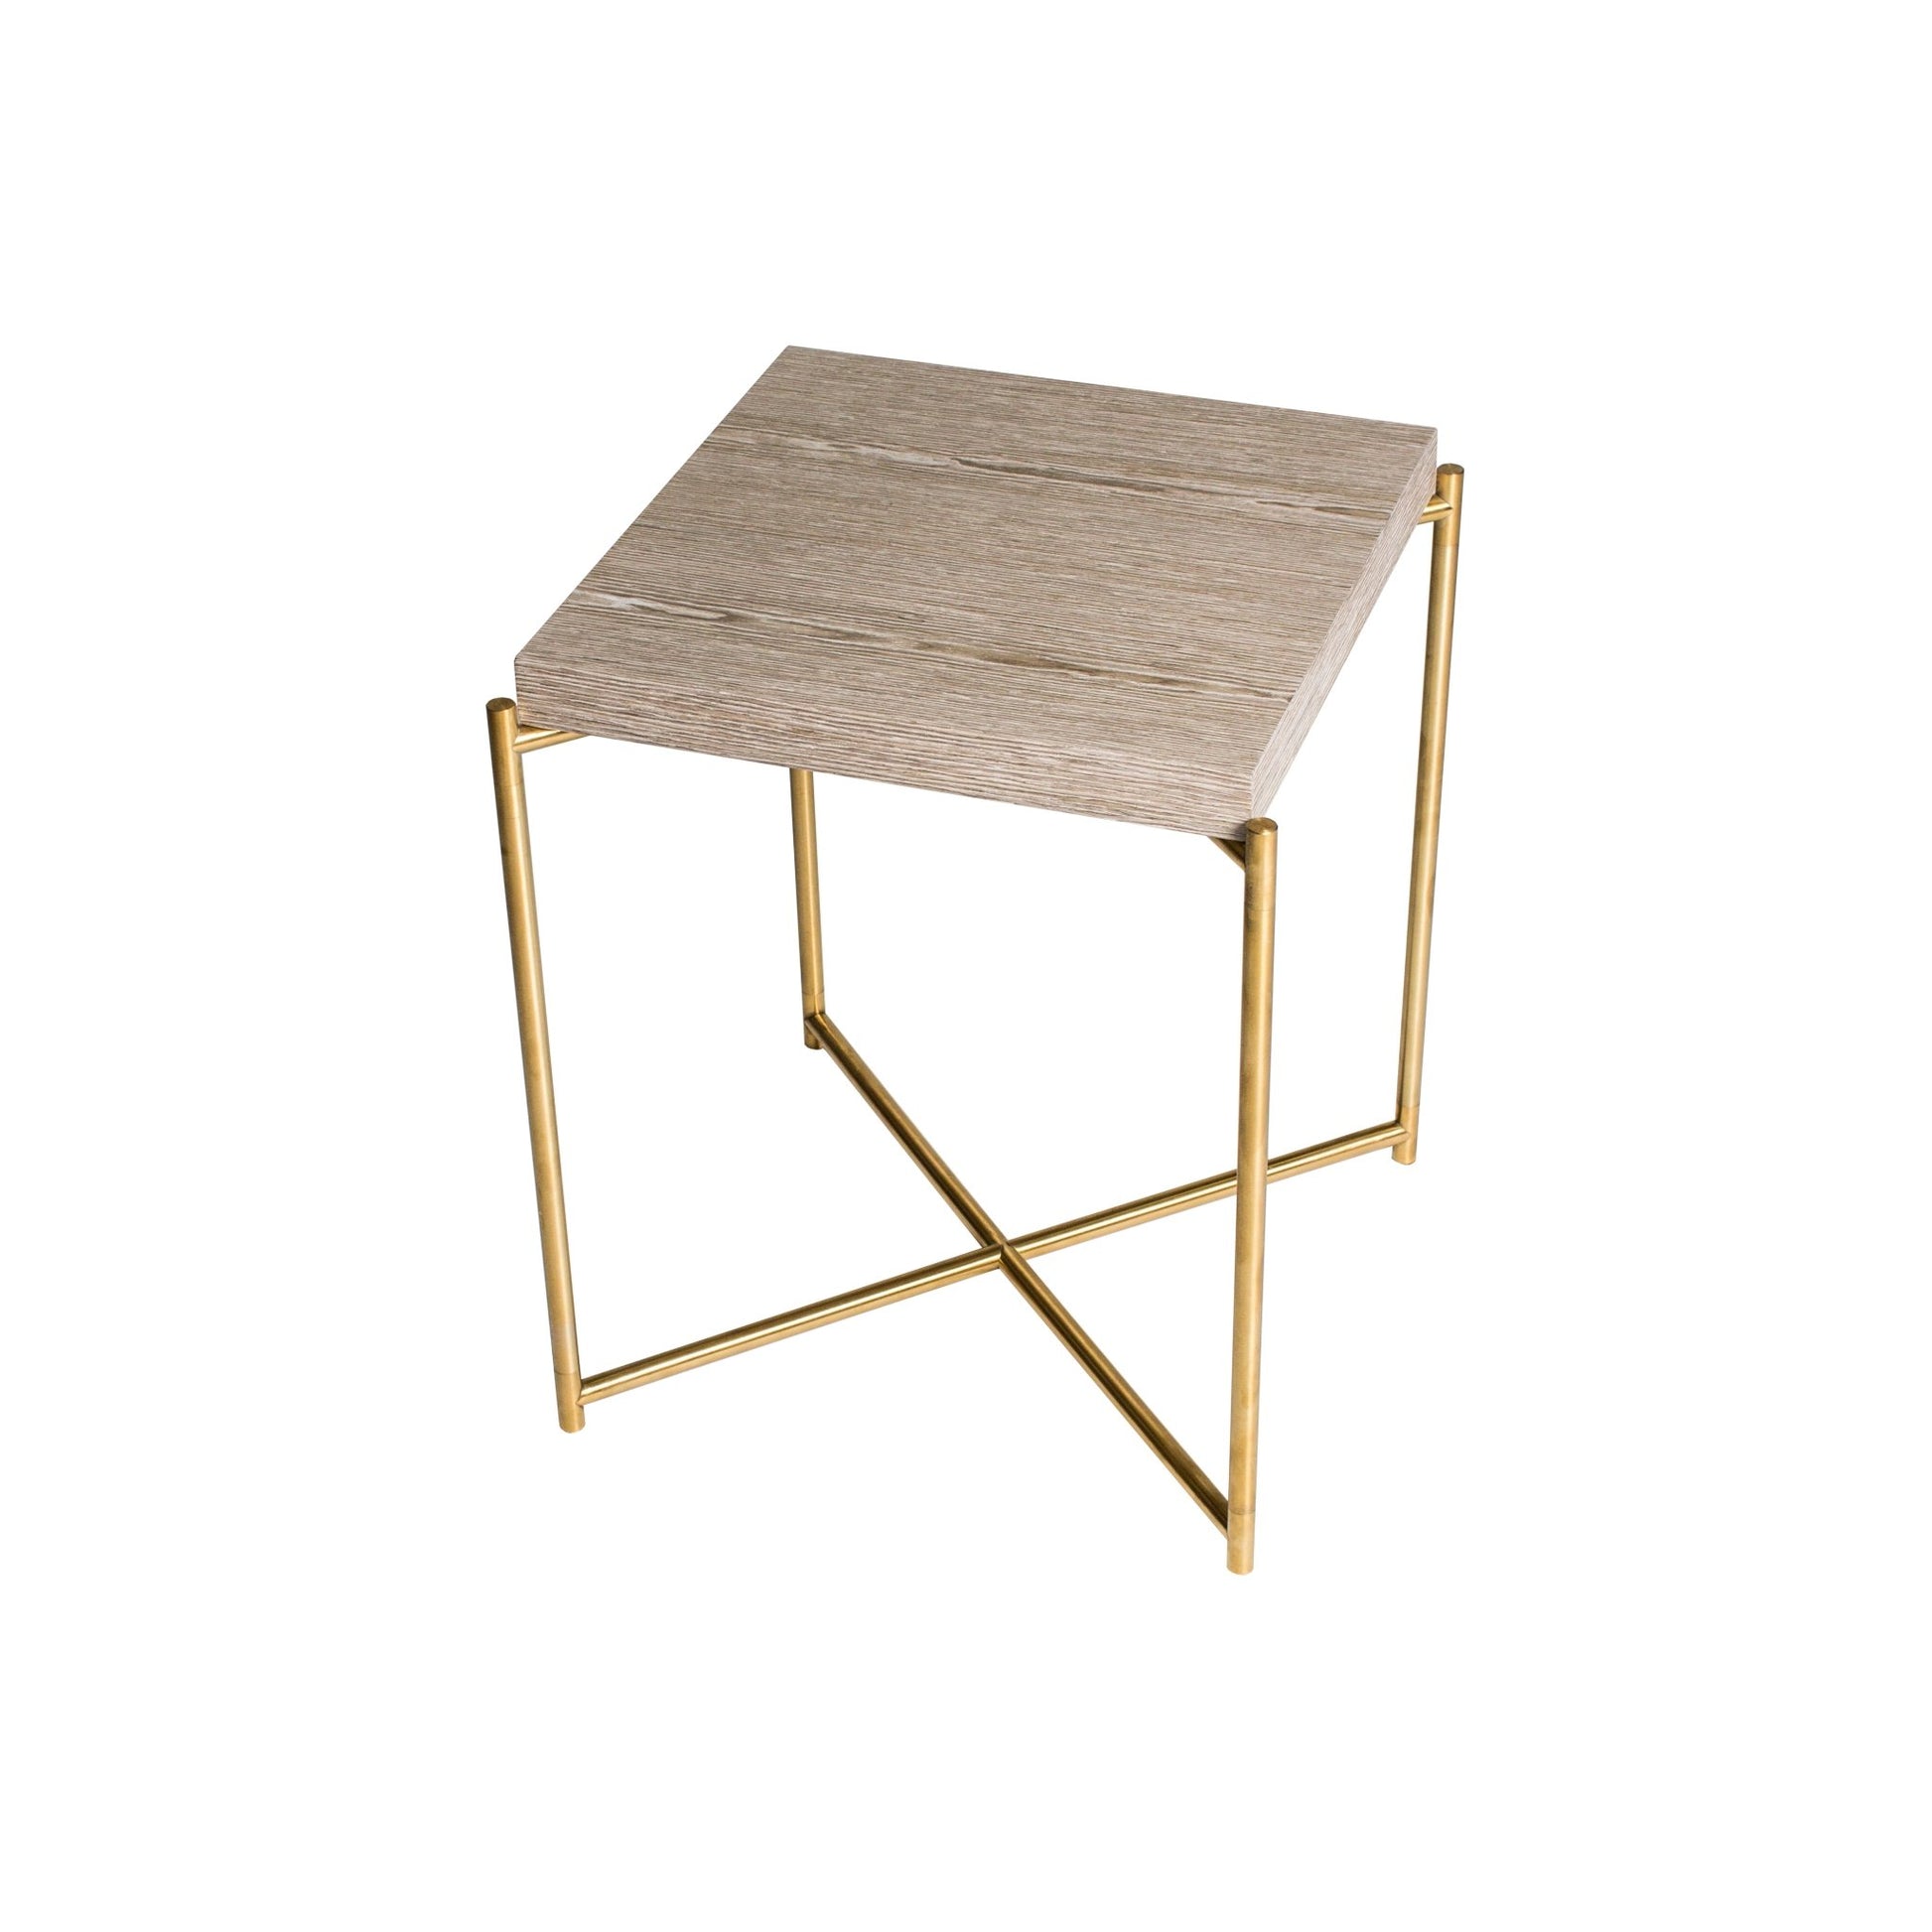 Iris Square Side Table - Weathered Oak & Brass Frame